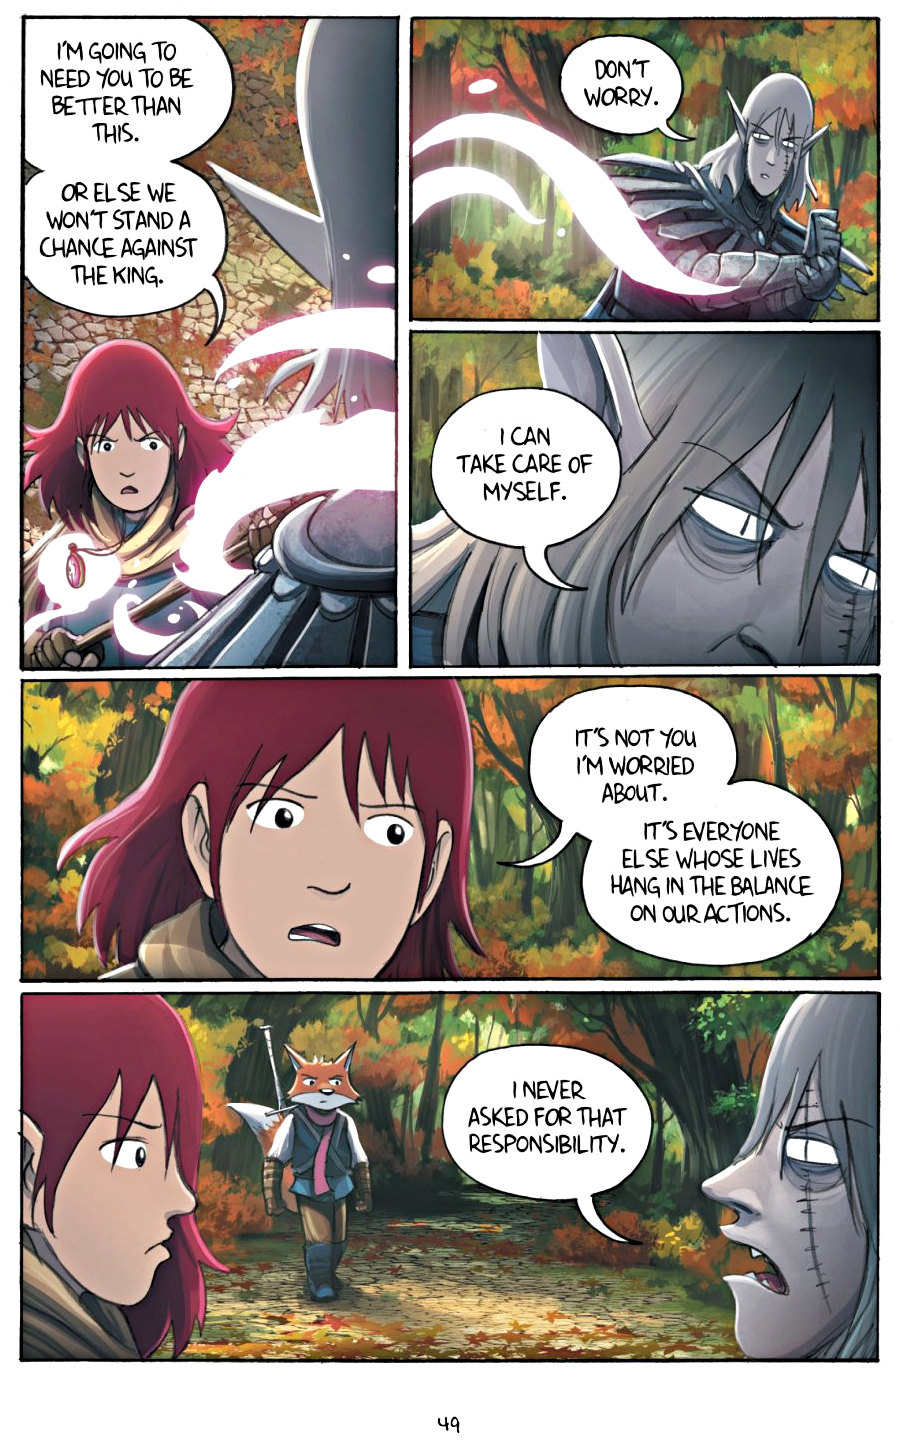 page 49 of amulet 5 prince of the elves graphic novel